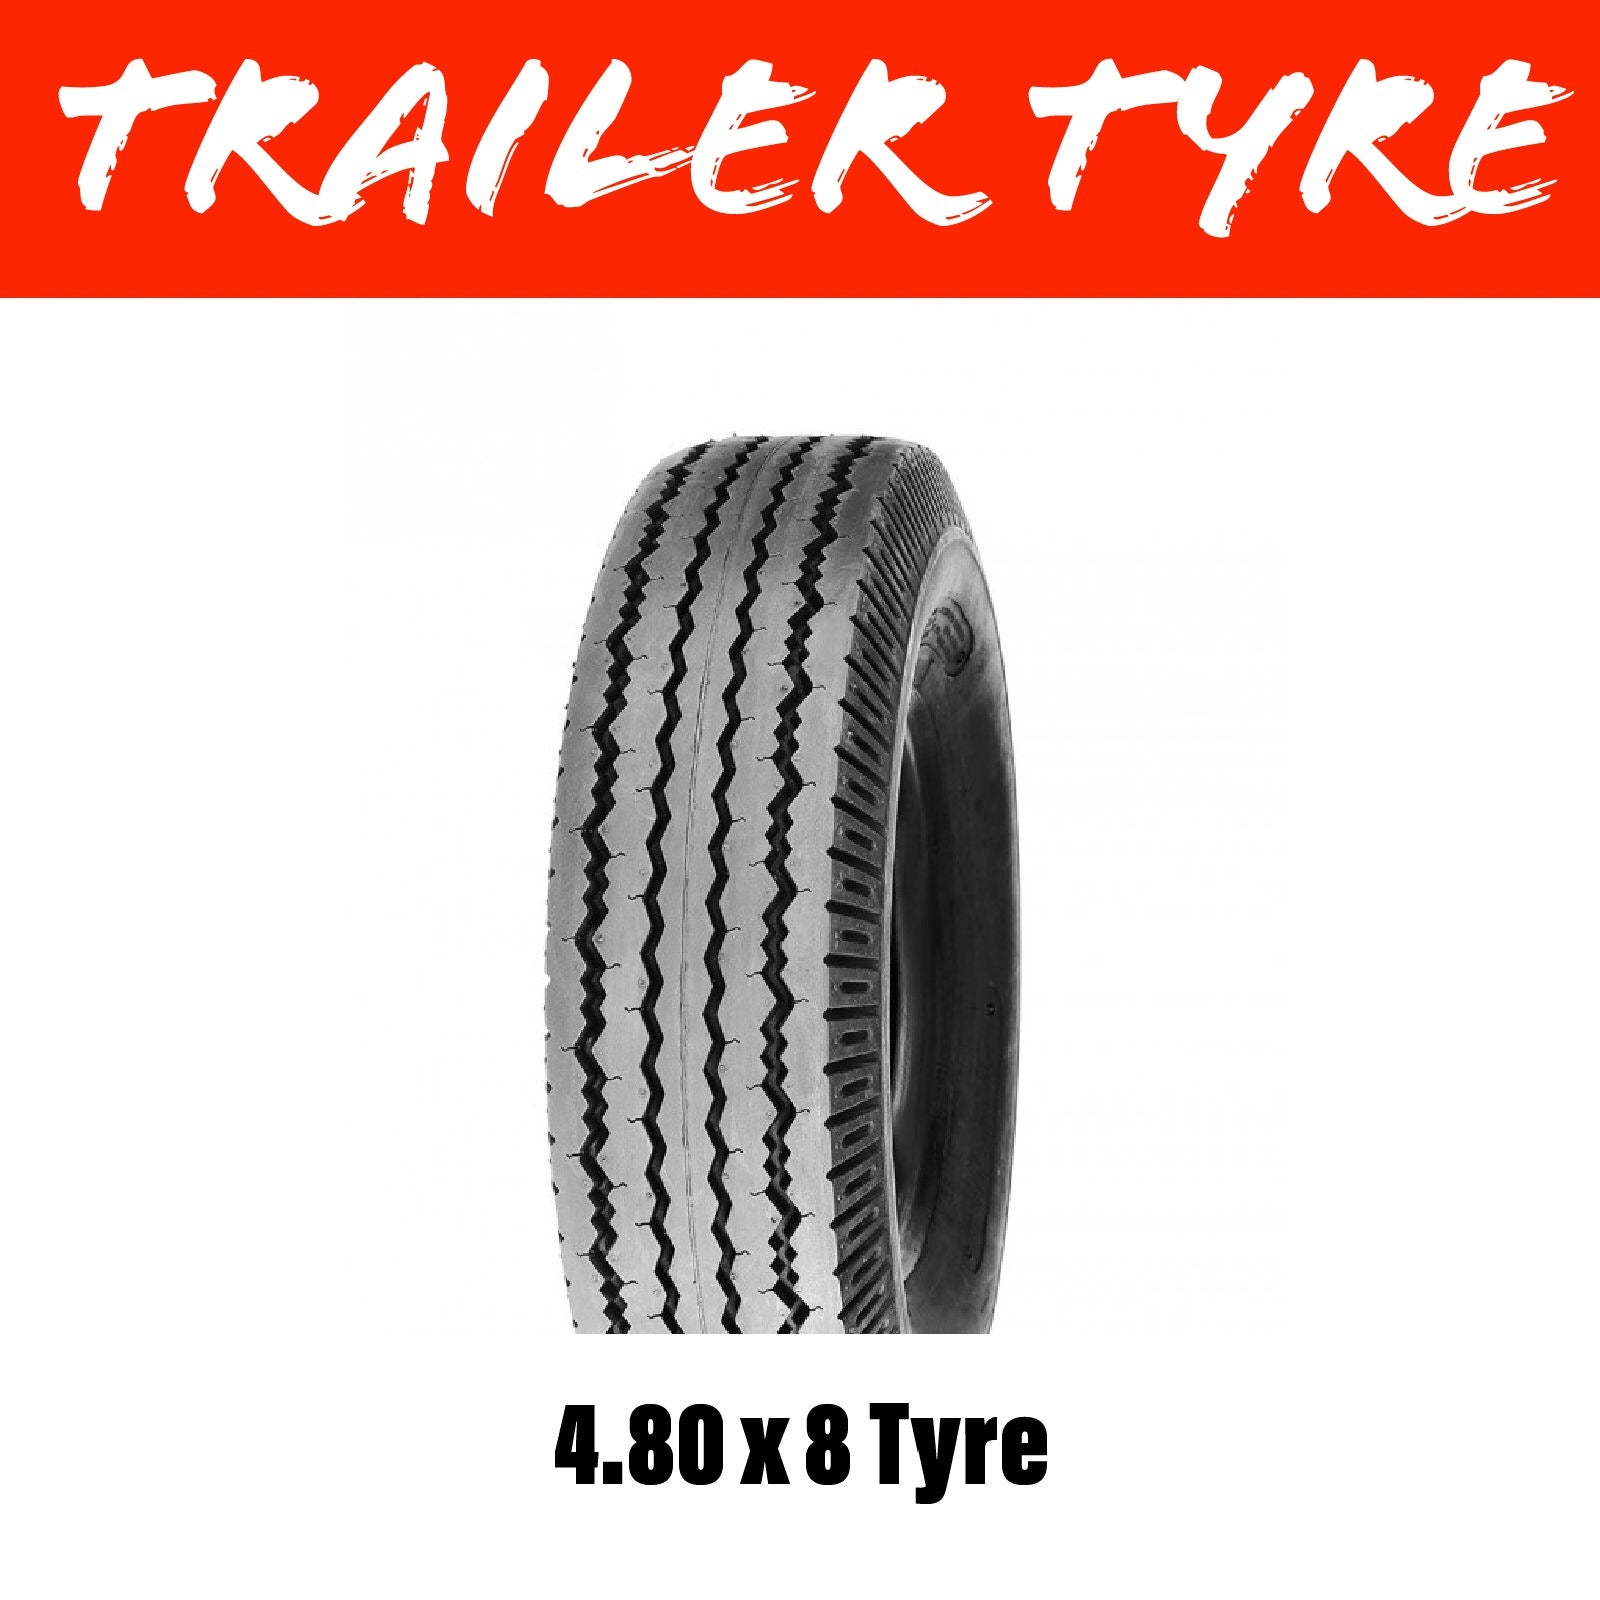 4.80 X 8 TRAILER TYRE 6 PLY